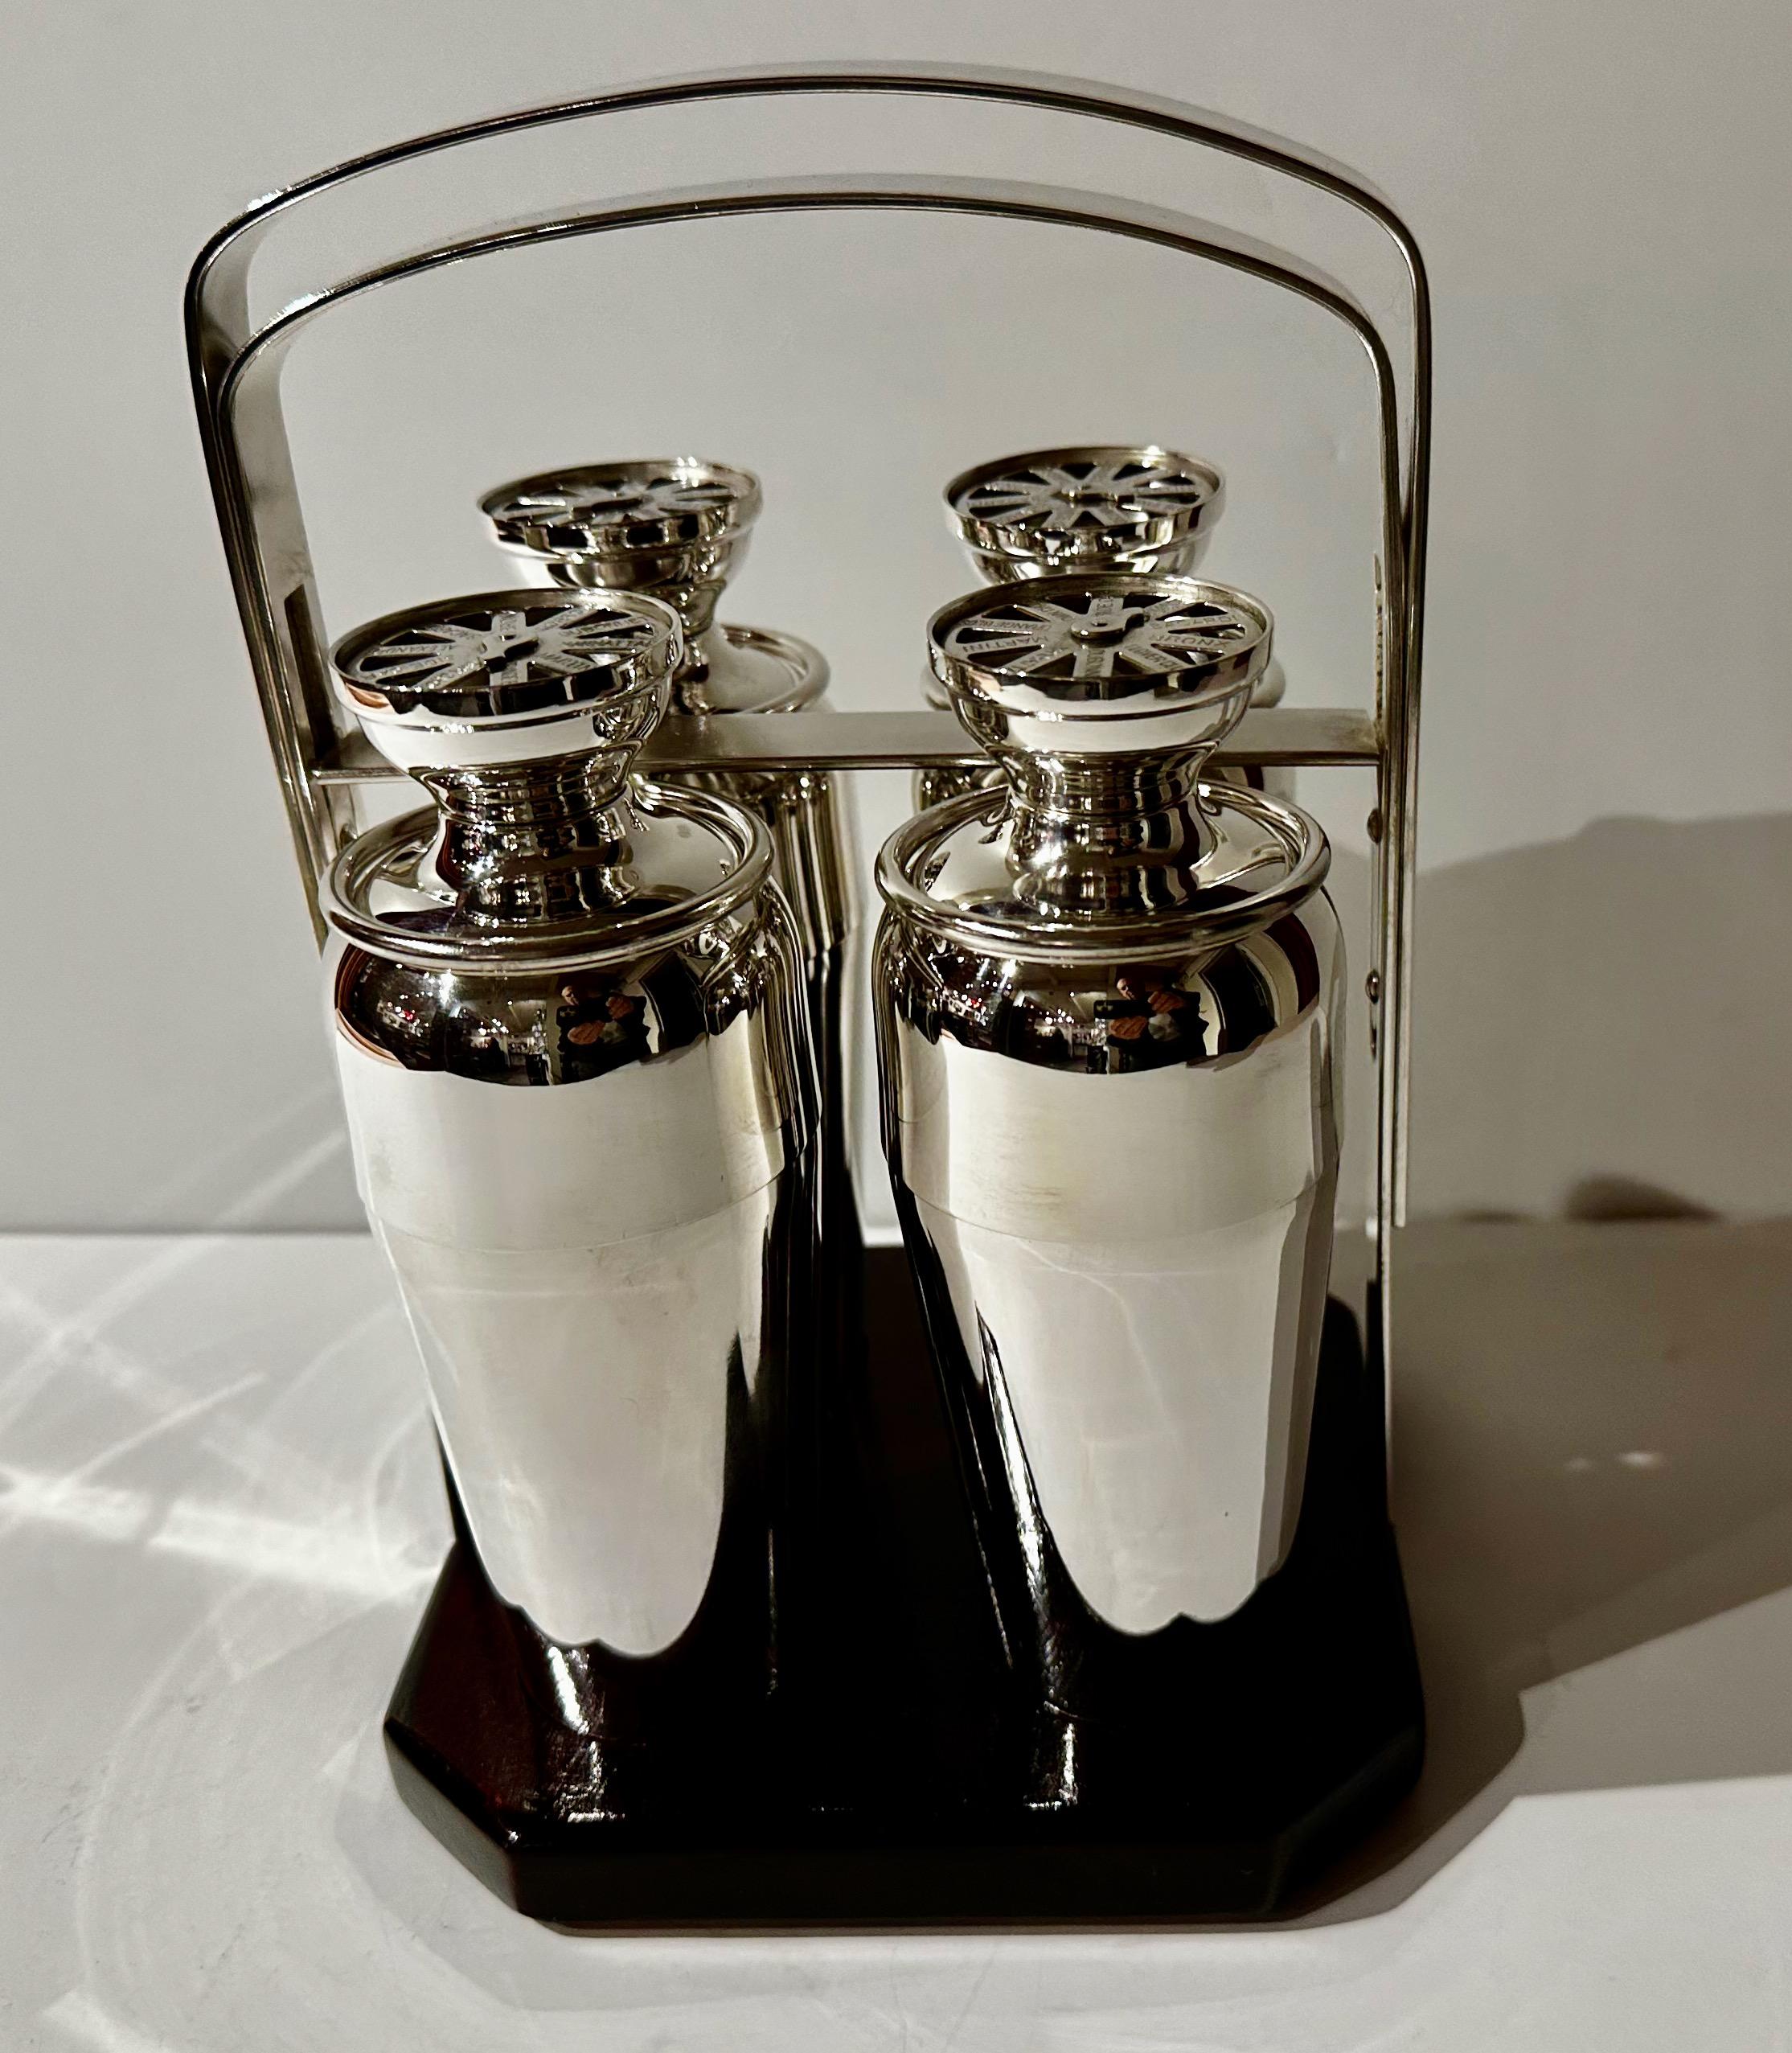 Set of four newly restored silver-plated cocktail shakers each with a cocktail selection dial on the top, contained within a Tantalus-like frame/Stand that secures the shakers in place when carrying. This wooden base caddy with a silver-plated